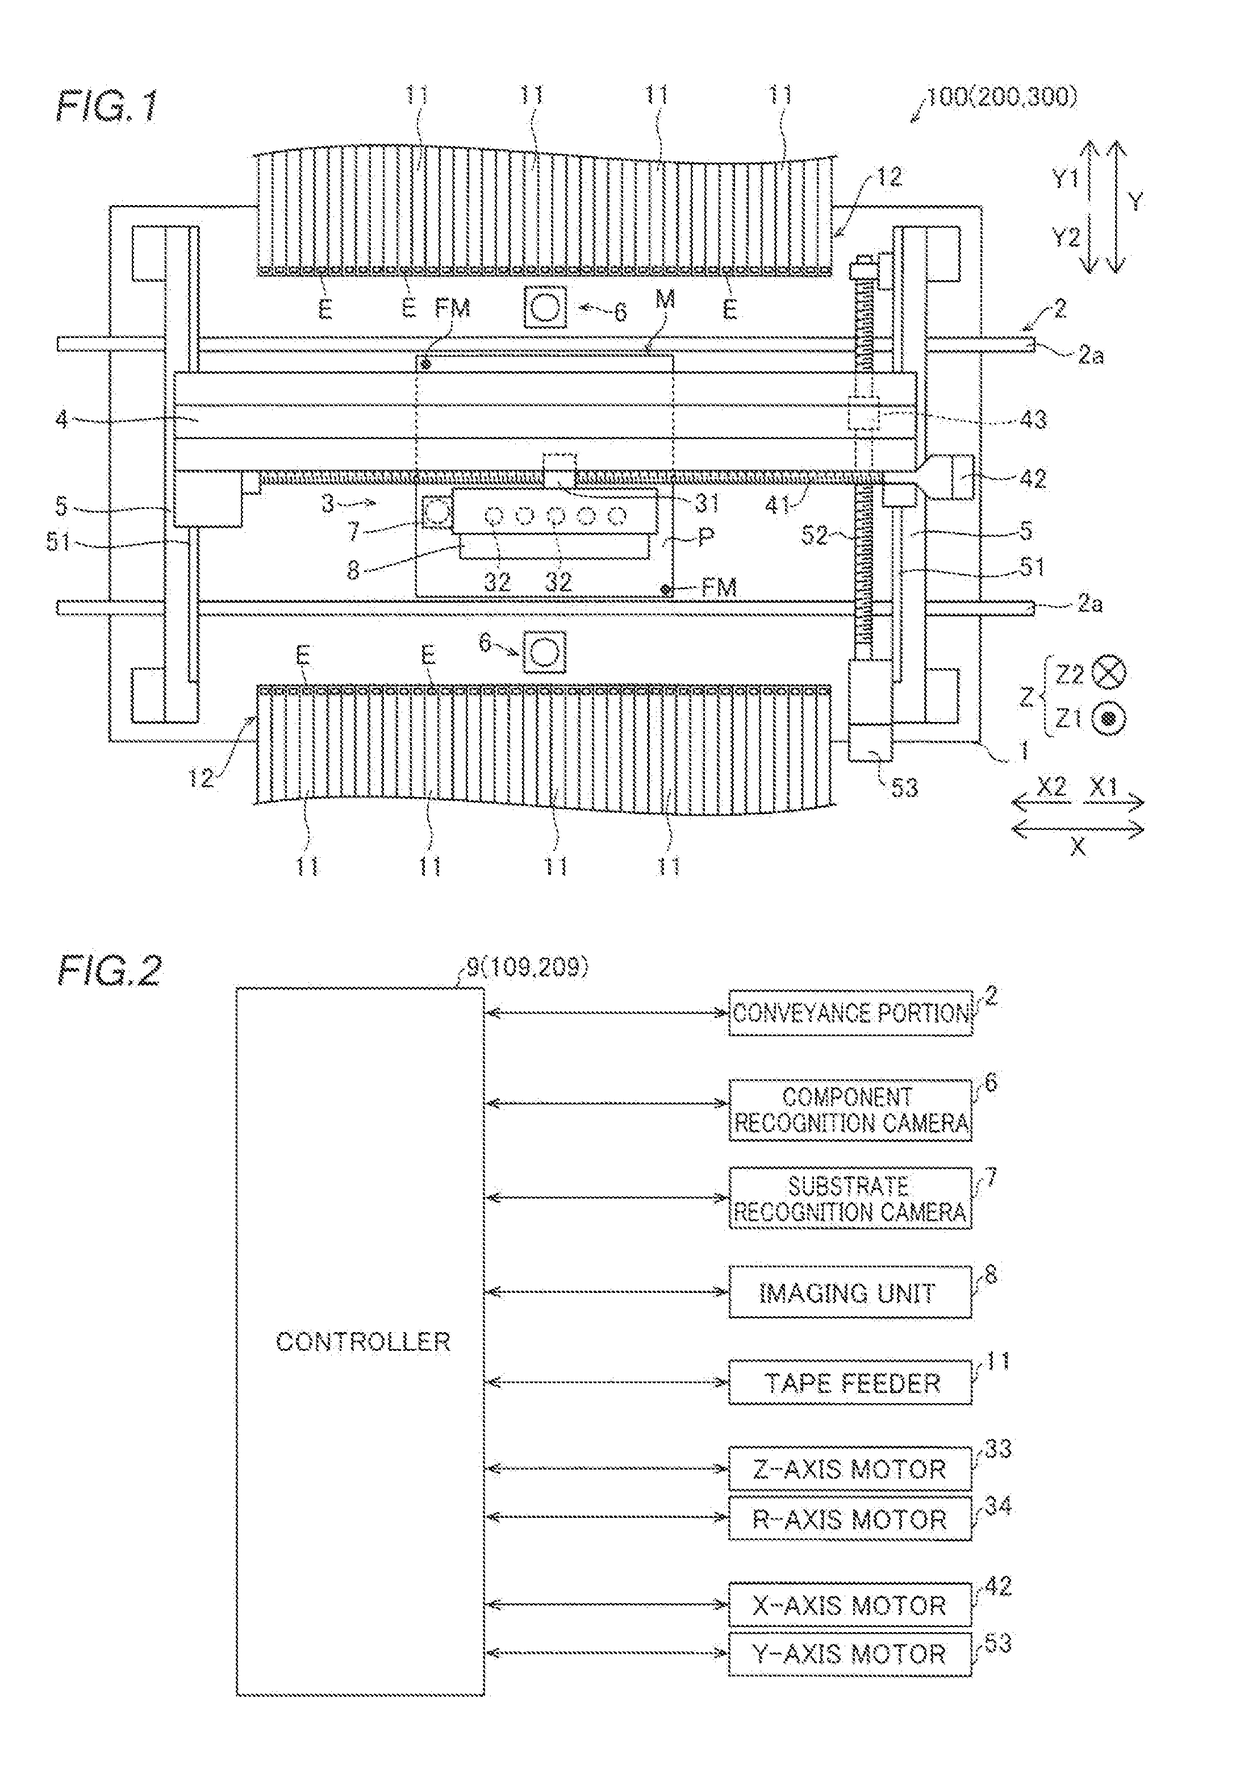 Component mounting device